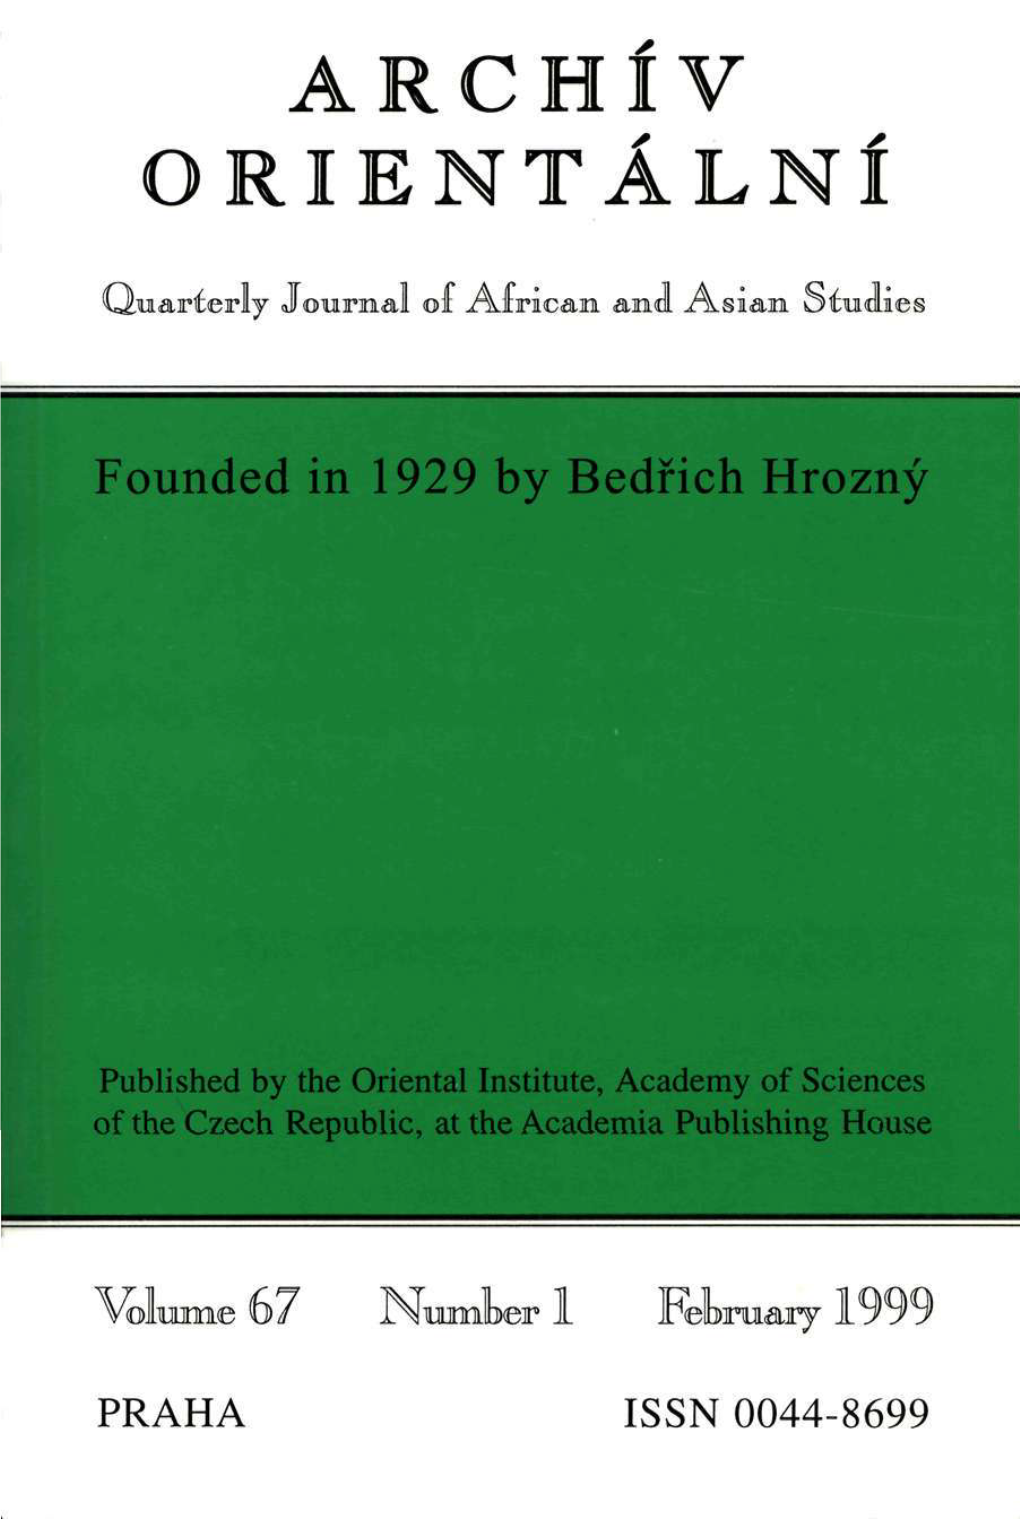 ARCHIV ORIENTALNI Quarterly Journal of African And